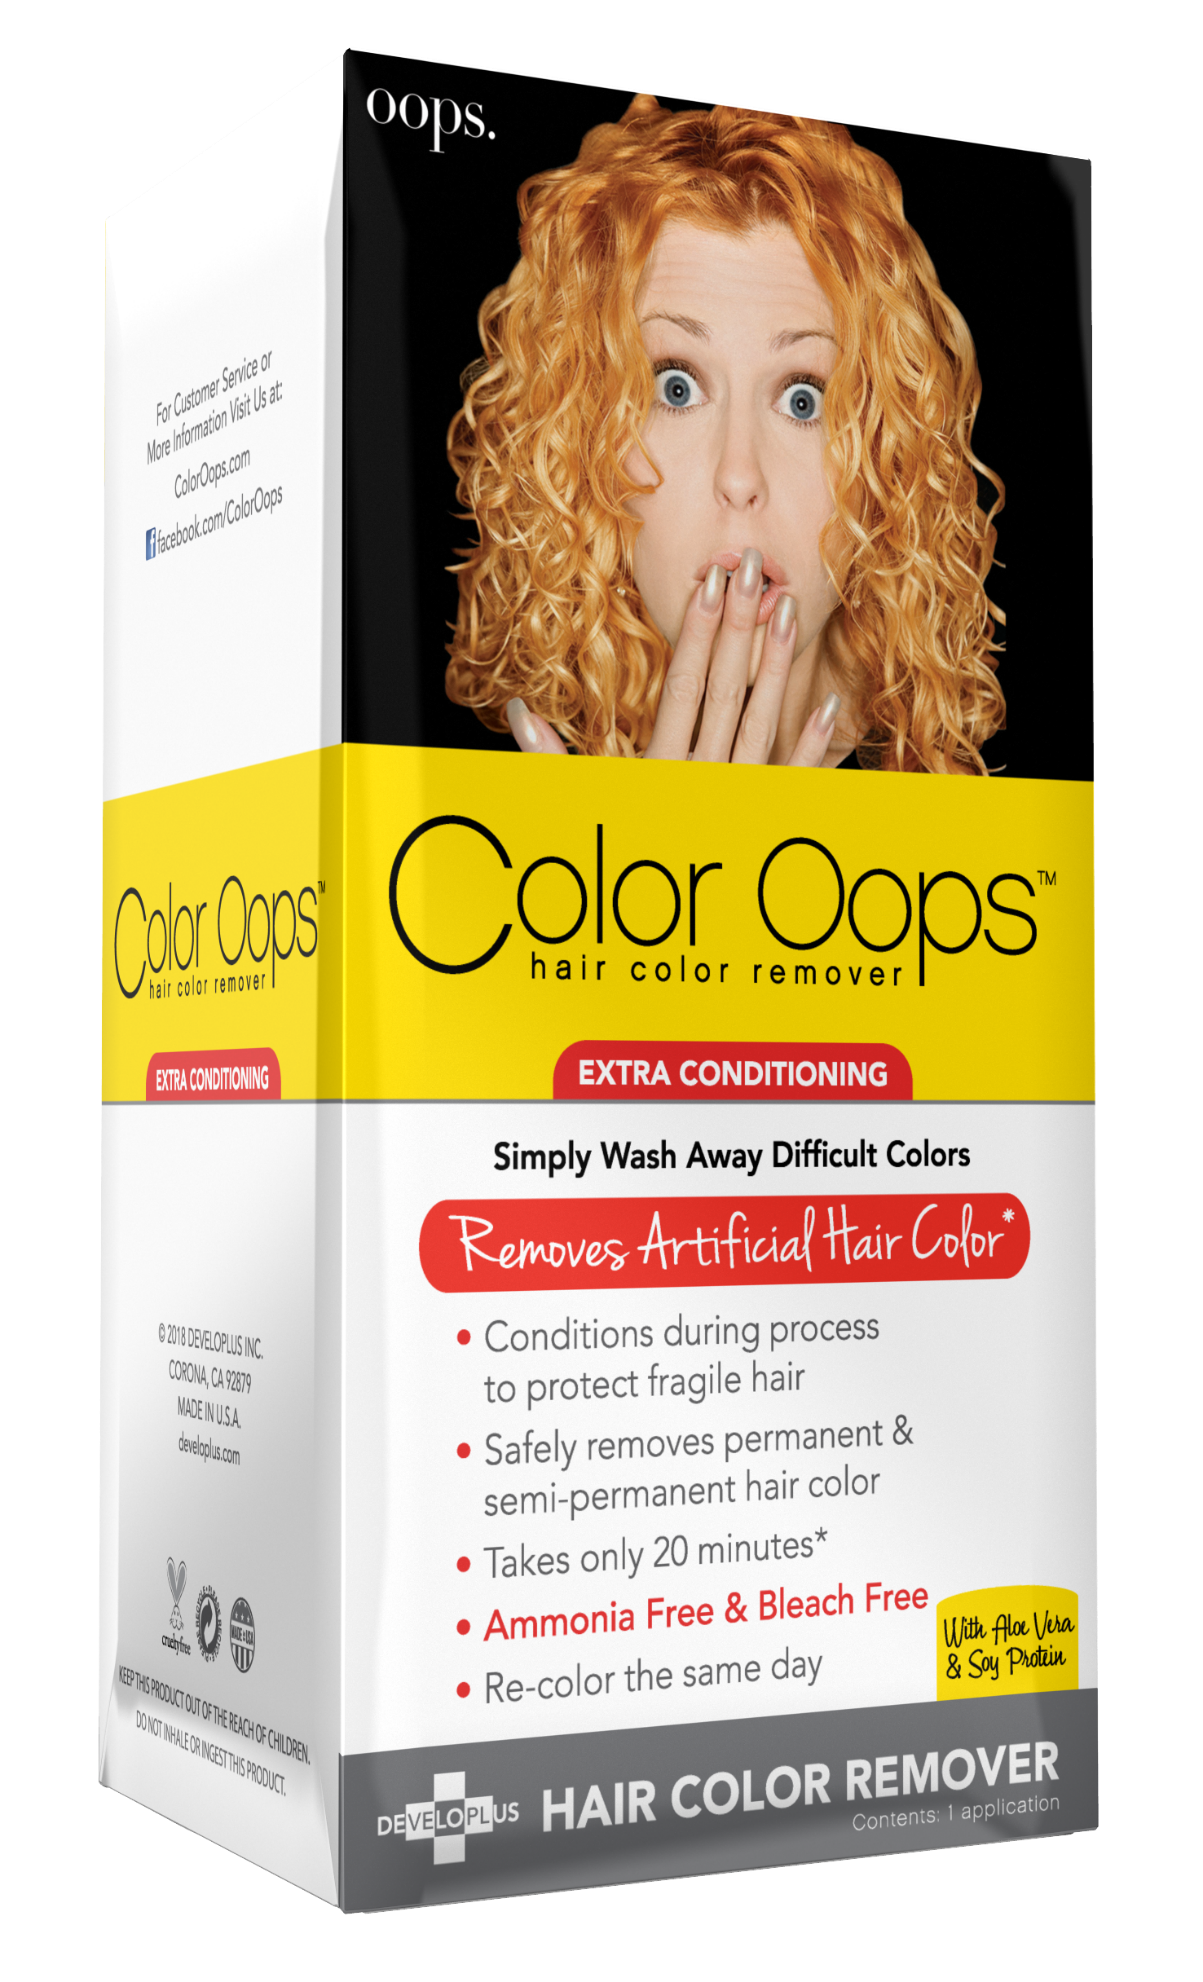 Color Oops Hair Color Remover-Extra Conditioning | TotallyHairCare